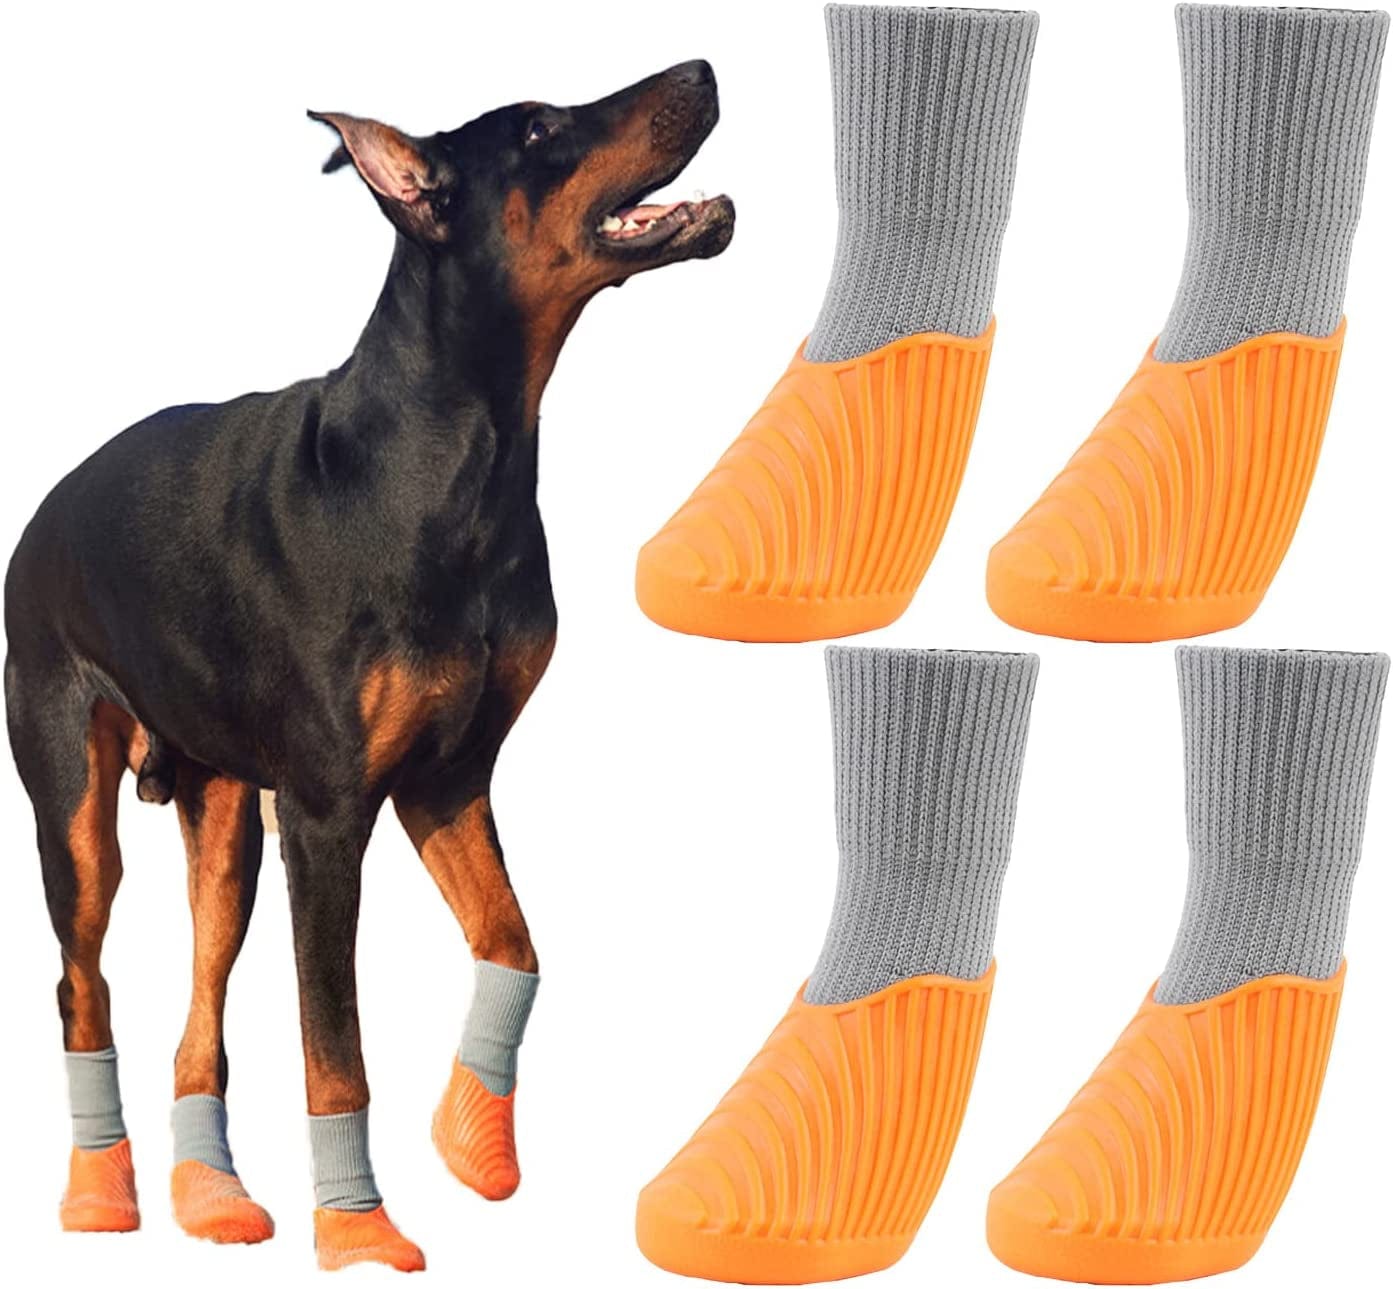 Orange Rubber Dog Boots 4 Packs for Hiking and Running, anti Slip Waterproof Dog Shoes and Socks with Velcro Strap Suitable for Indoor, Outdoor. Small/Medium/Large Dogs Paw Protector. L Animals & Pet Supplies > Pet Supplies > Dog Supplies > Dog Apparel YESKIND Orange XL 